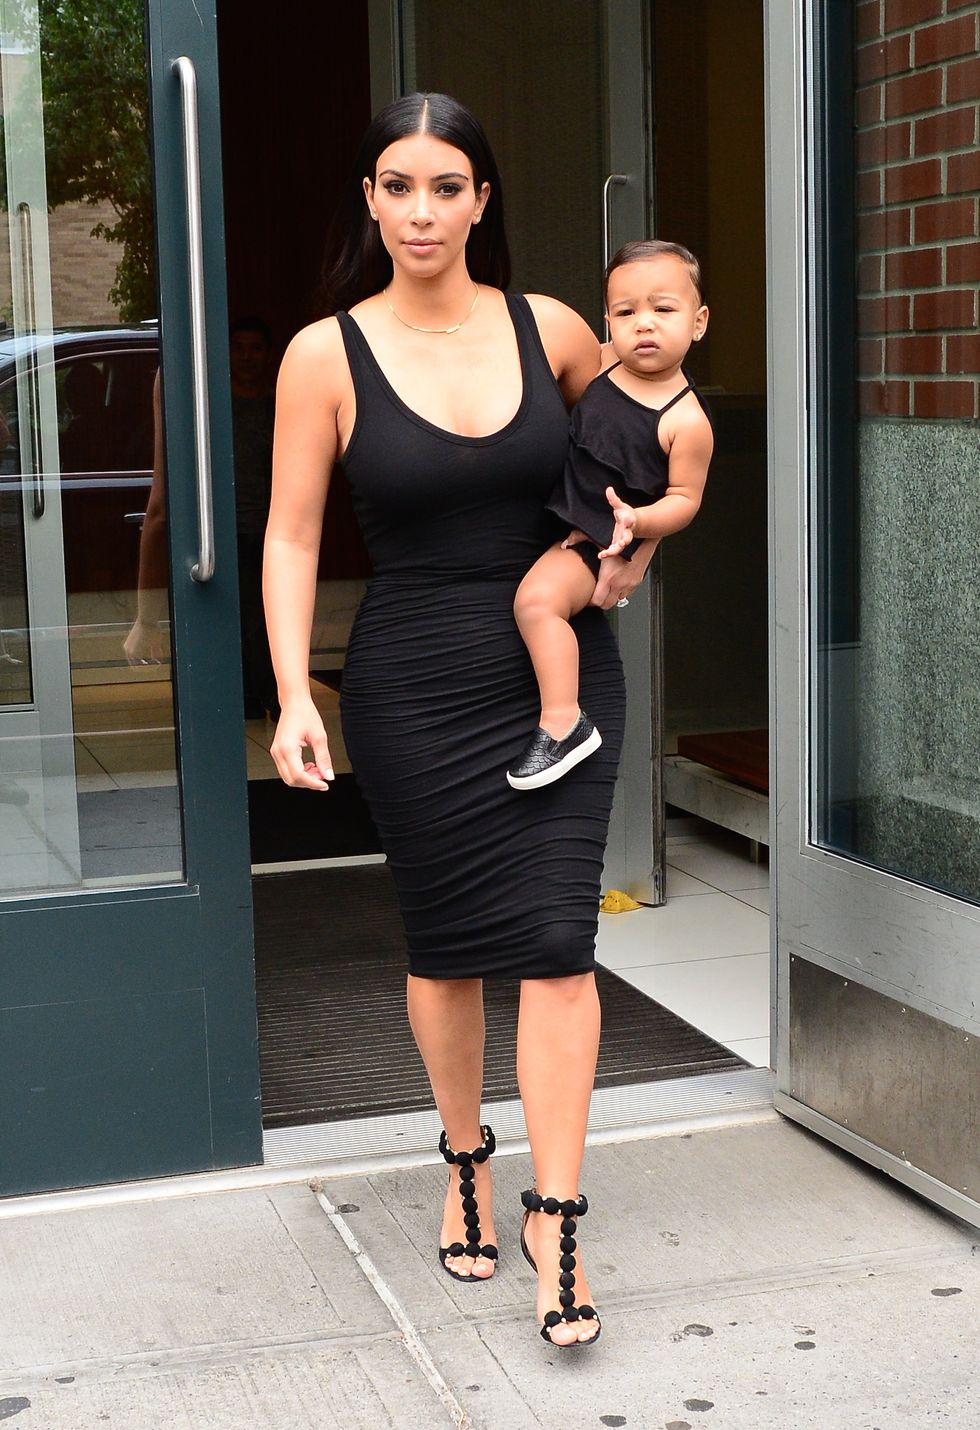 Kim Kardashian and North West out and about in matching outfits - cosmopolitan.co.uk